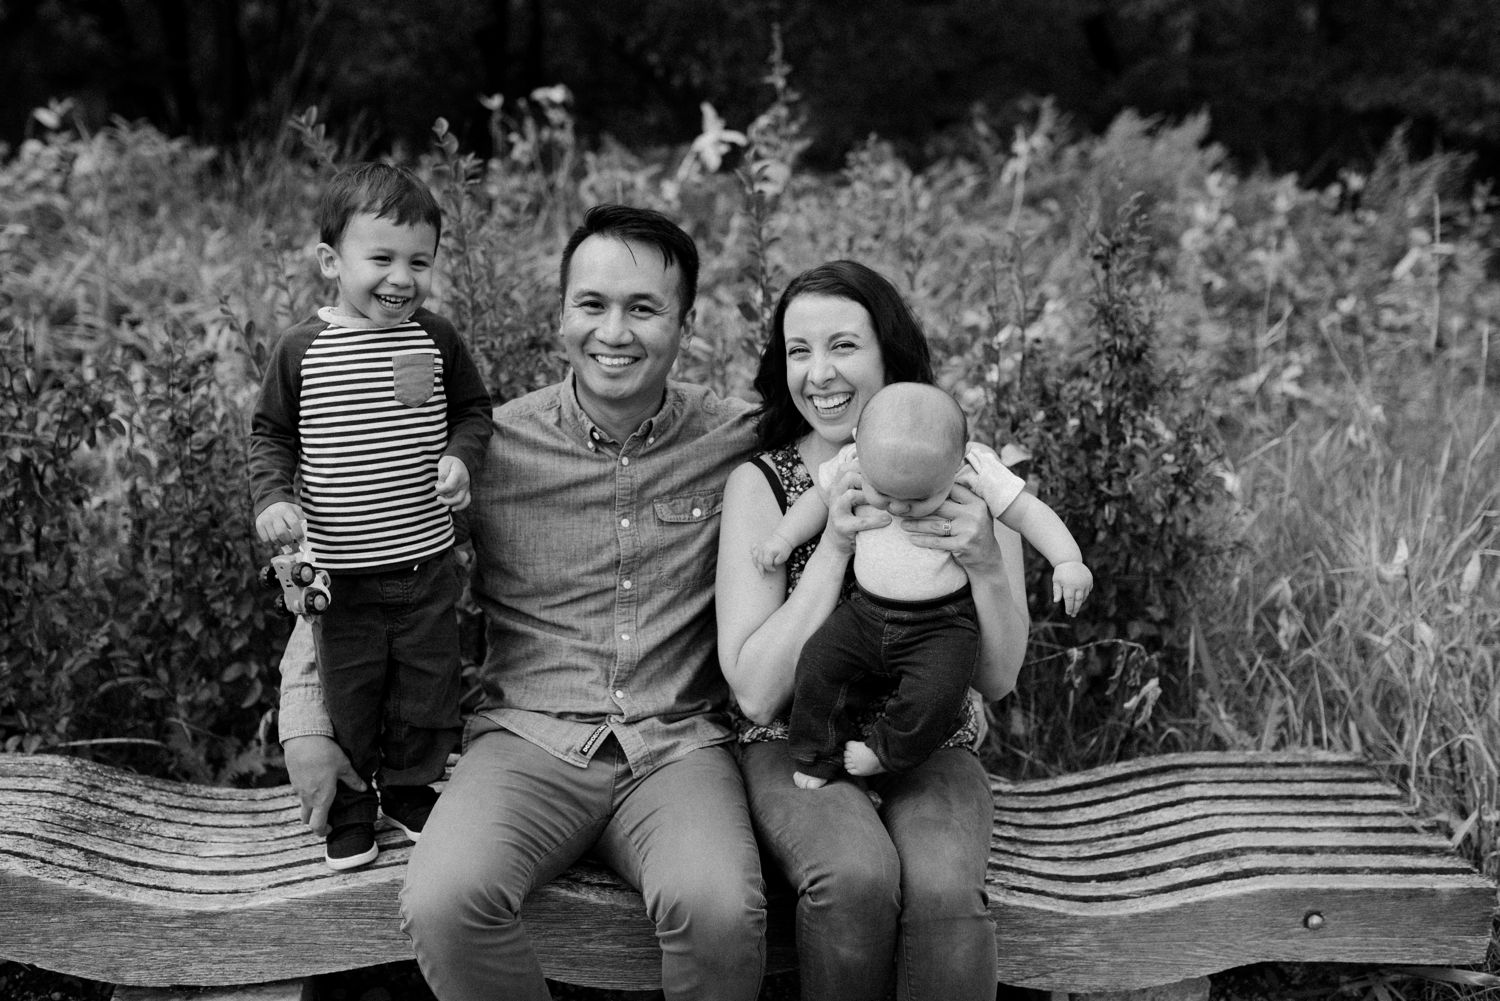 winnipeg lifestyle family shoot at St. Norbert Trappist Monastery, candid, timeless family portraits by Vanessa Renae Photography